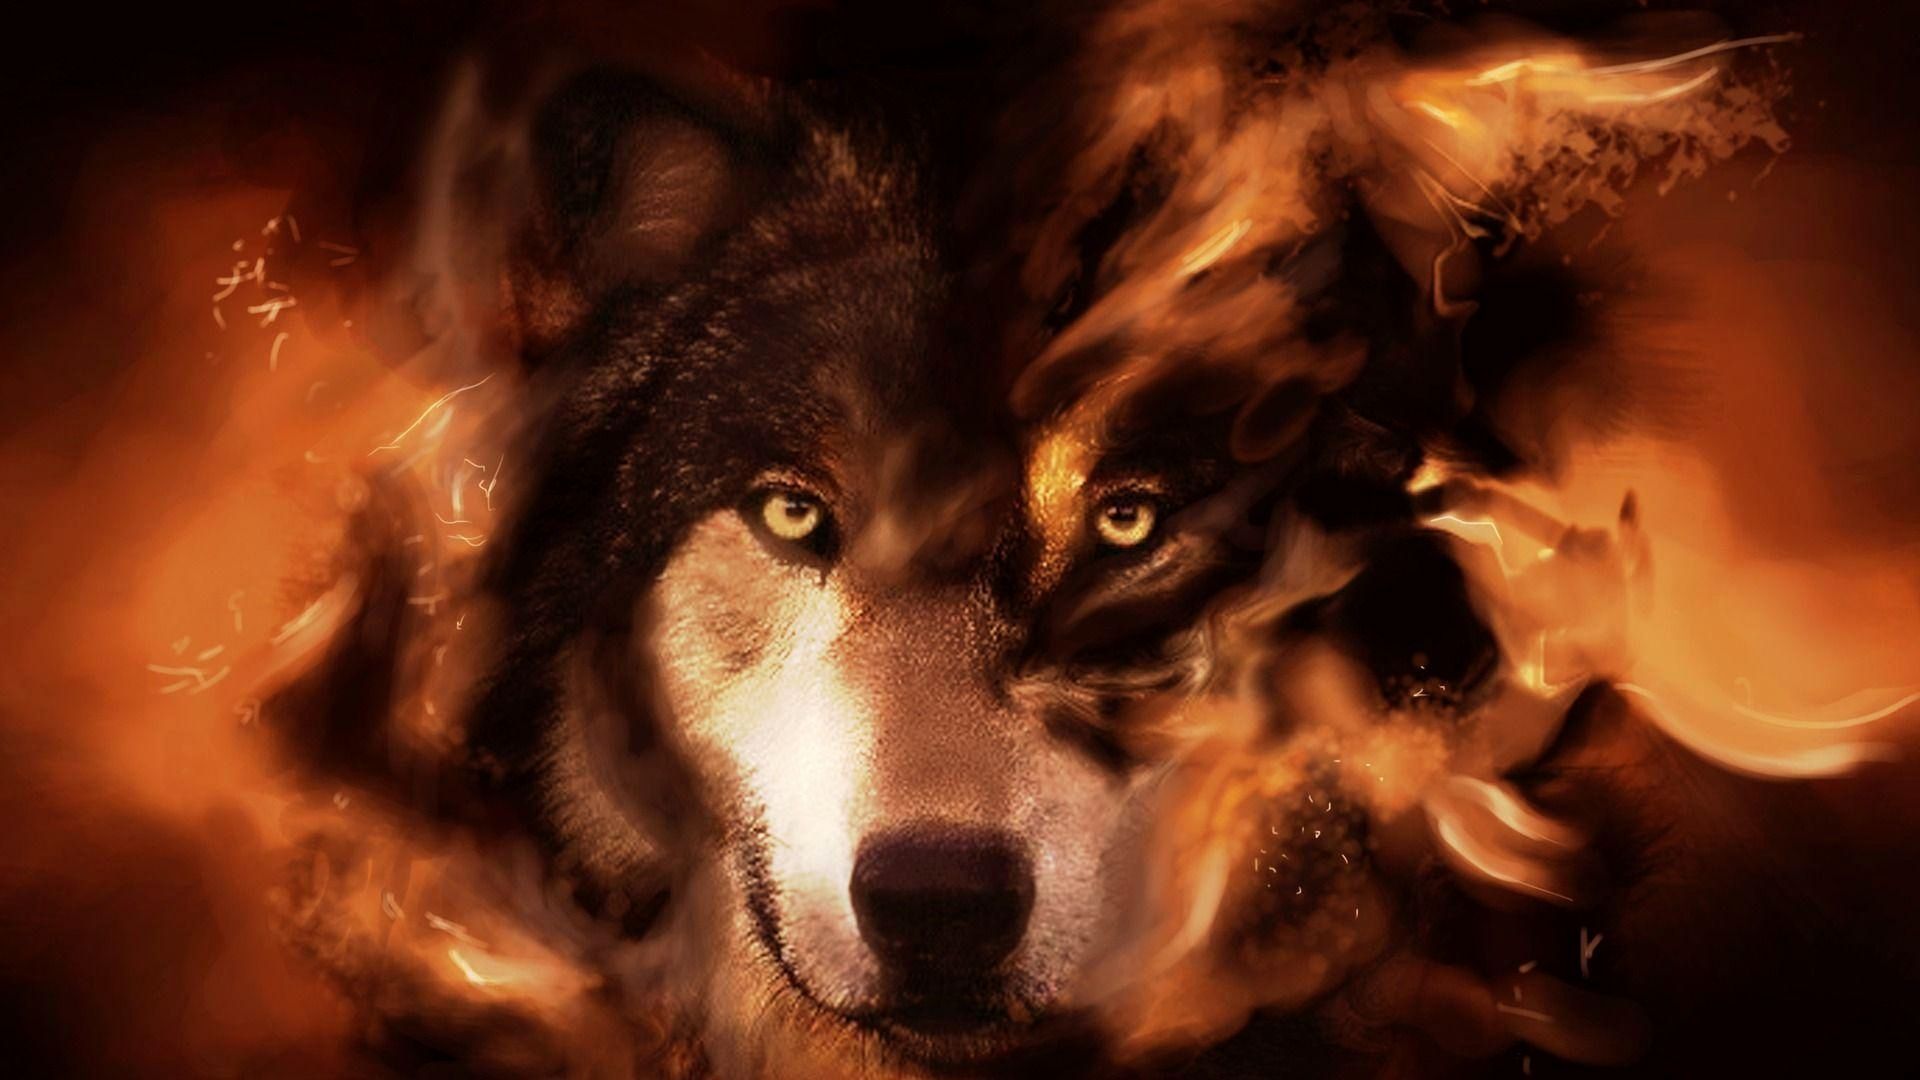 Fire Wolf Wallpaper Inspirational Fantasy Wolf Wallpaper Combination of The Hudson